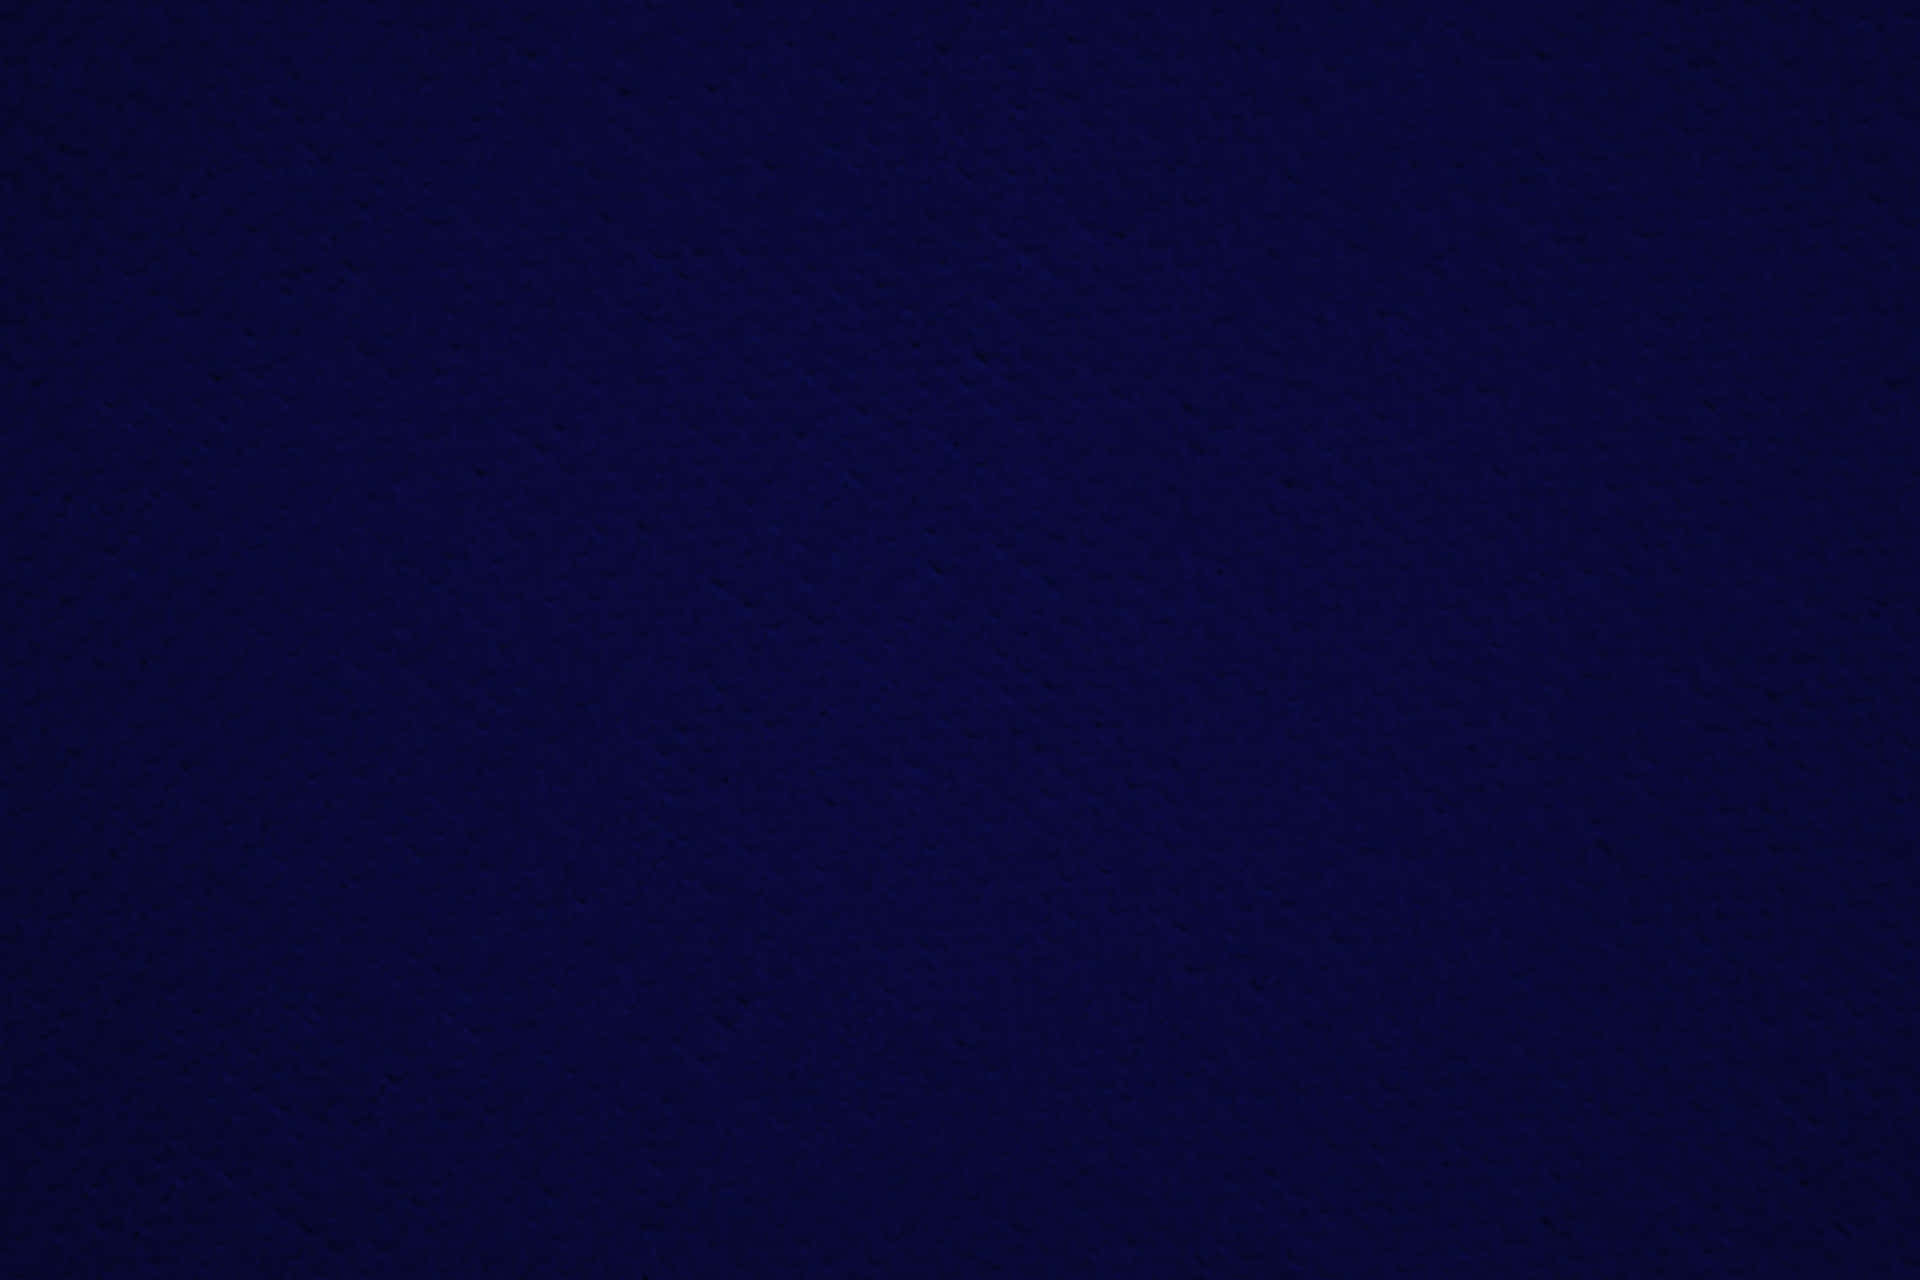 Simple Solid Navy Blue Background